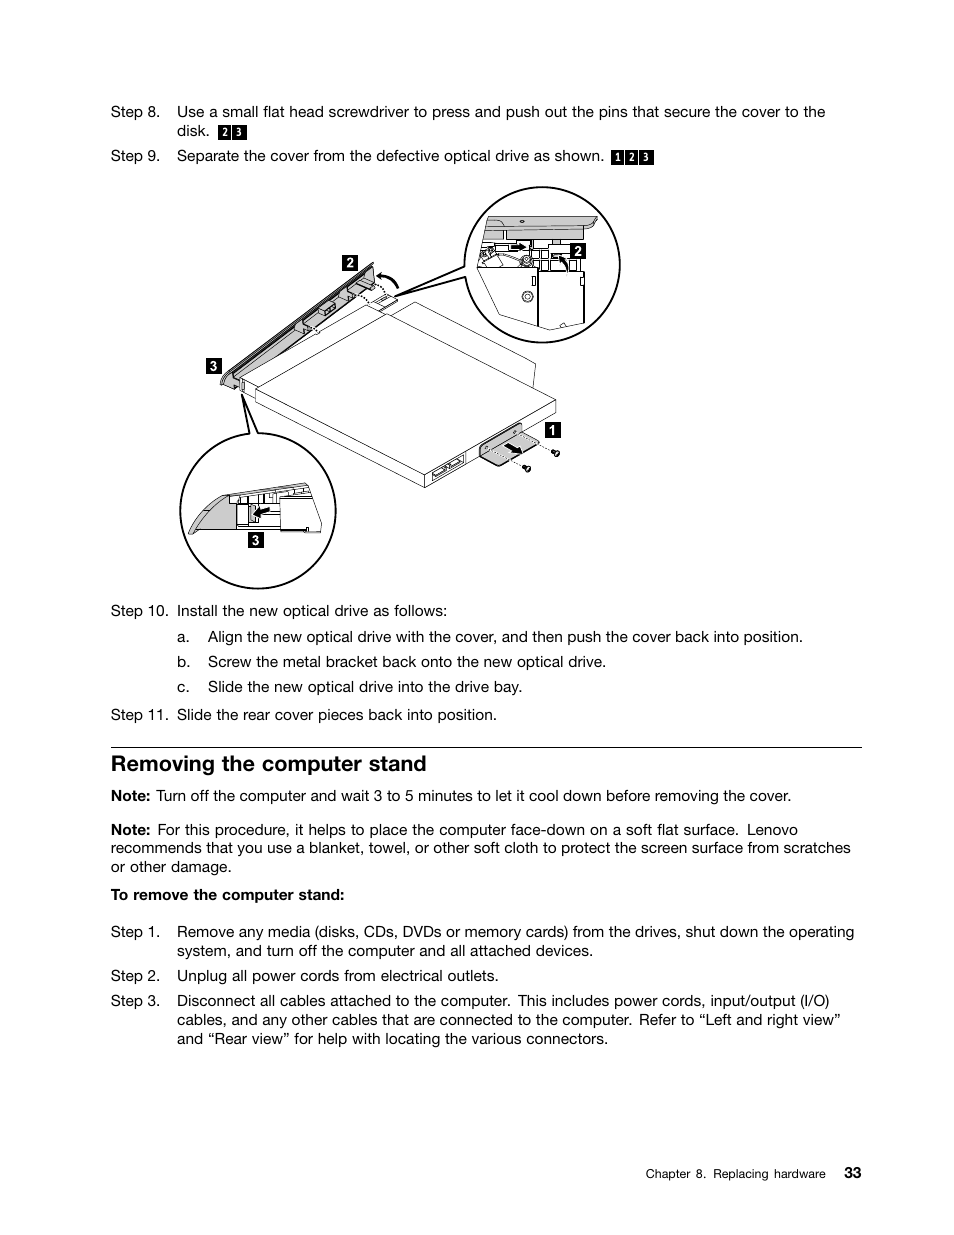 Removing the computer stand | Lenovo IdeaCentre B750 All-in-One User Manual  | Page 39 / 61 | Original mode